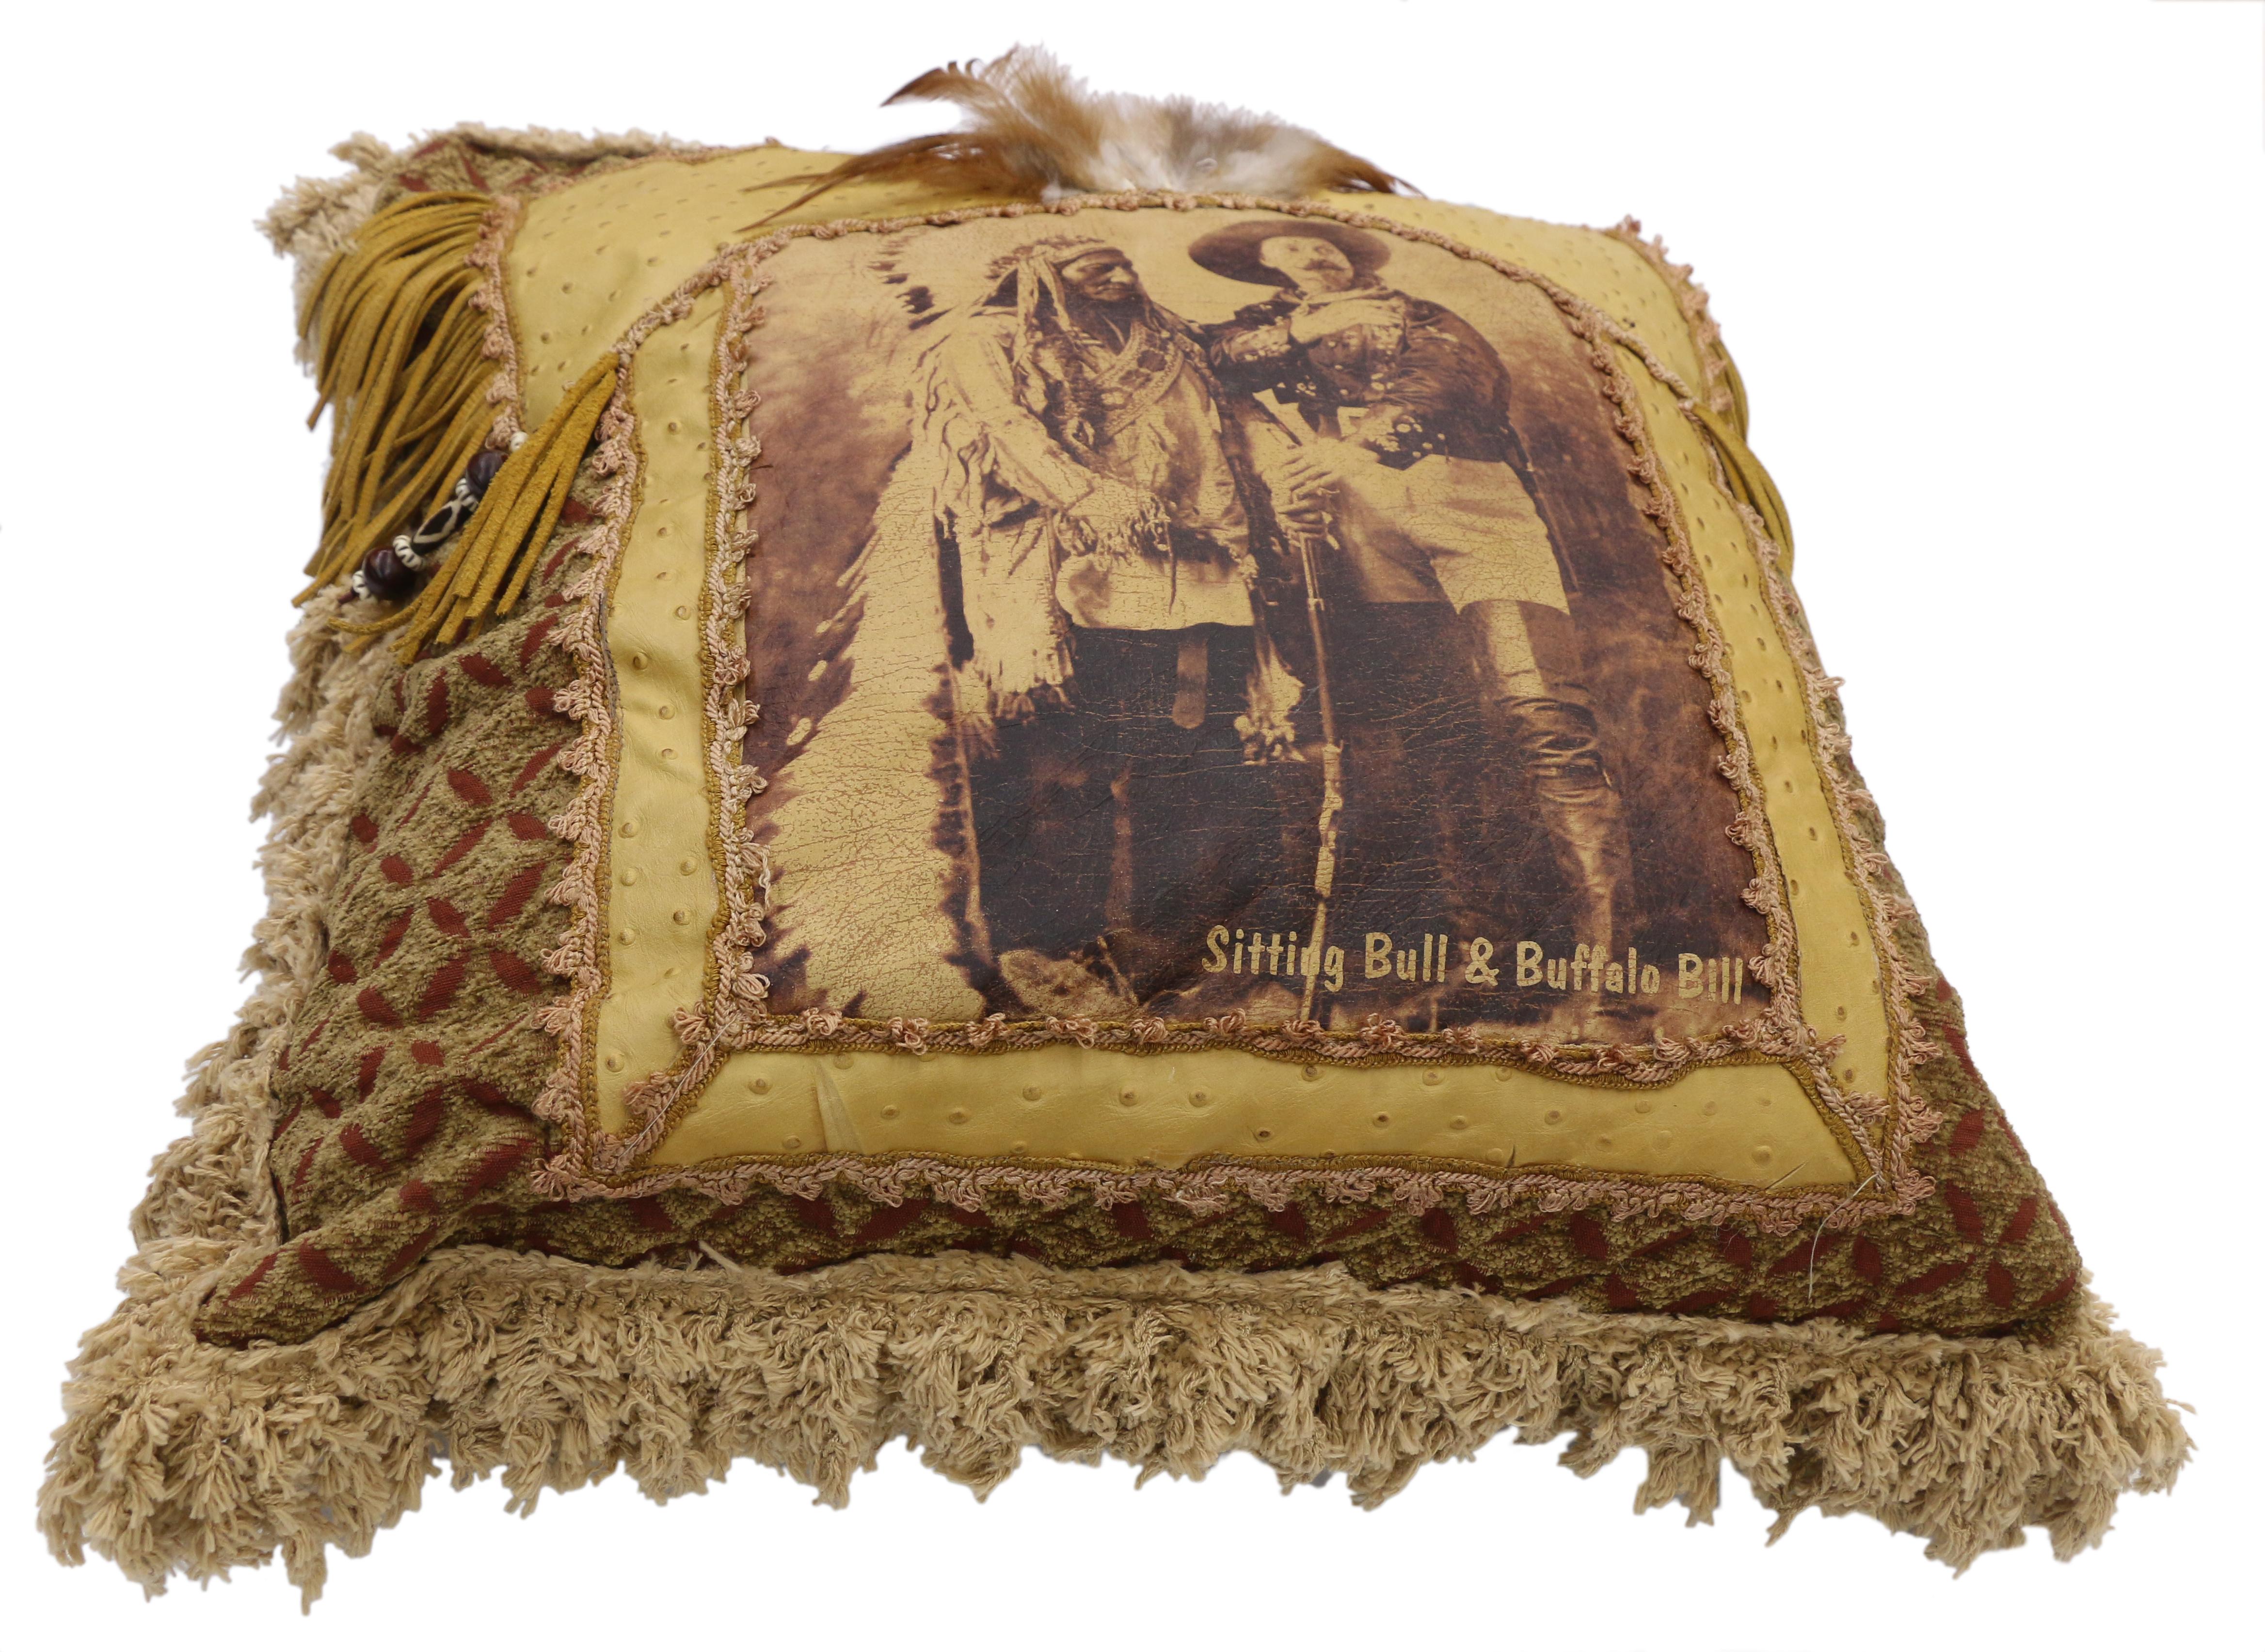 Native American Buffalo Bill and Sitting Bull Leather Throw Pillow with Anglo-Indian Style